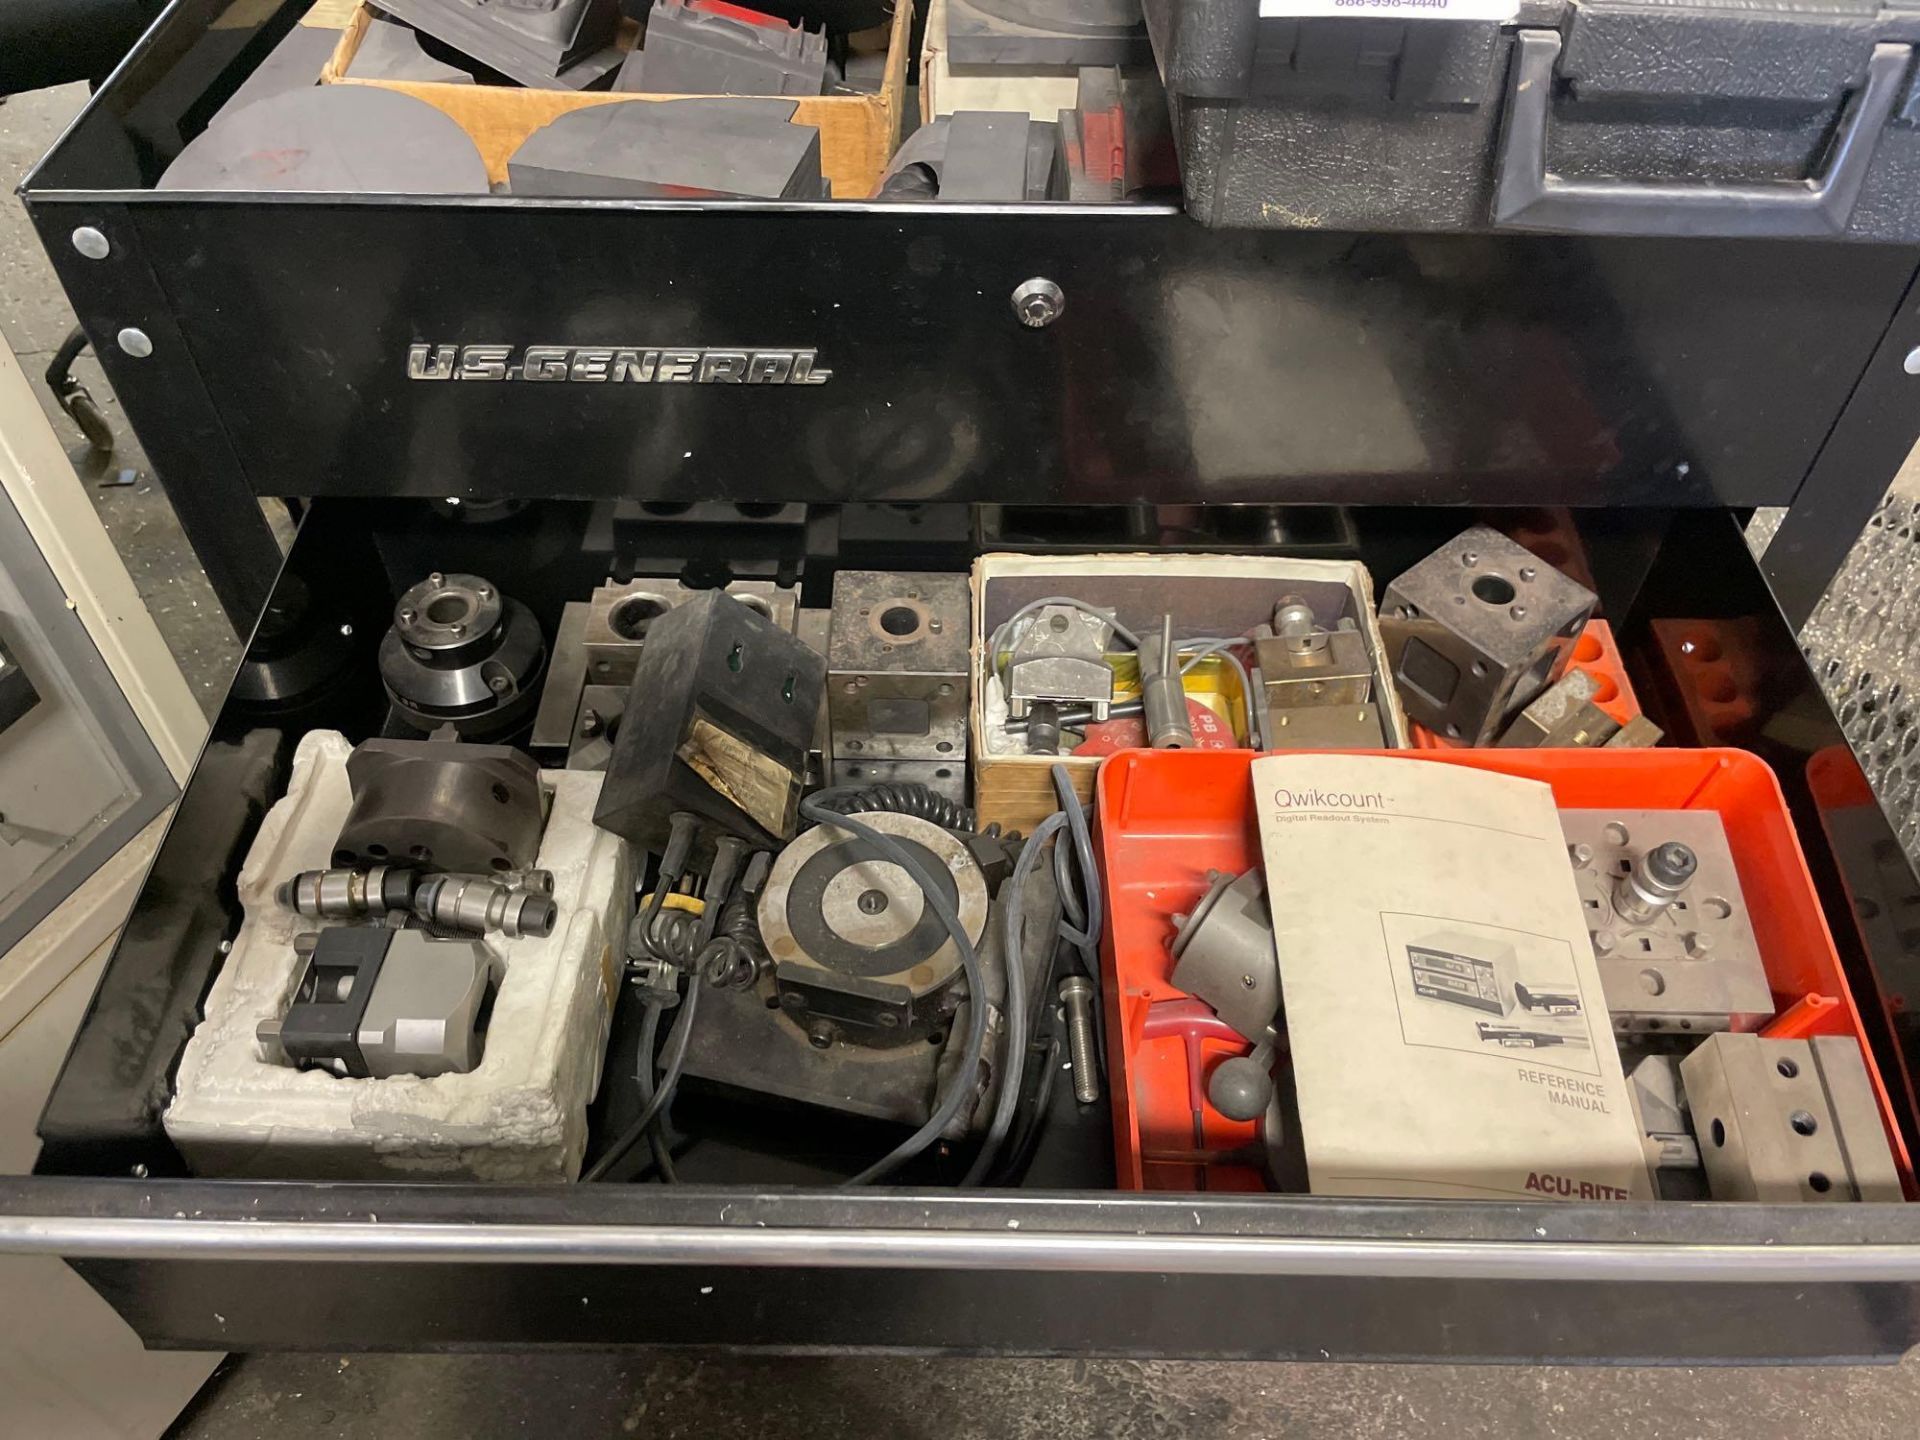 Hansvedt Tradesman SM-155 Sinker EDM, C axis, DRO with EDM Roto Bore Cutting Head and Extra Parts - Image 13 of 16